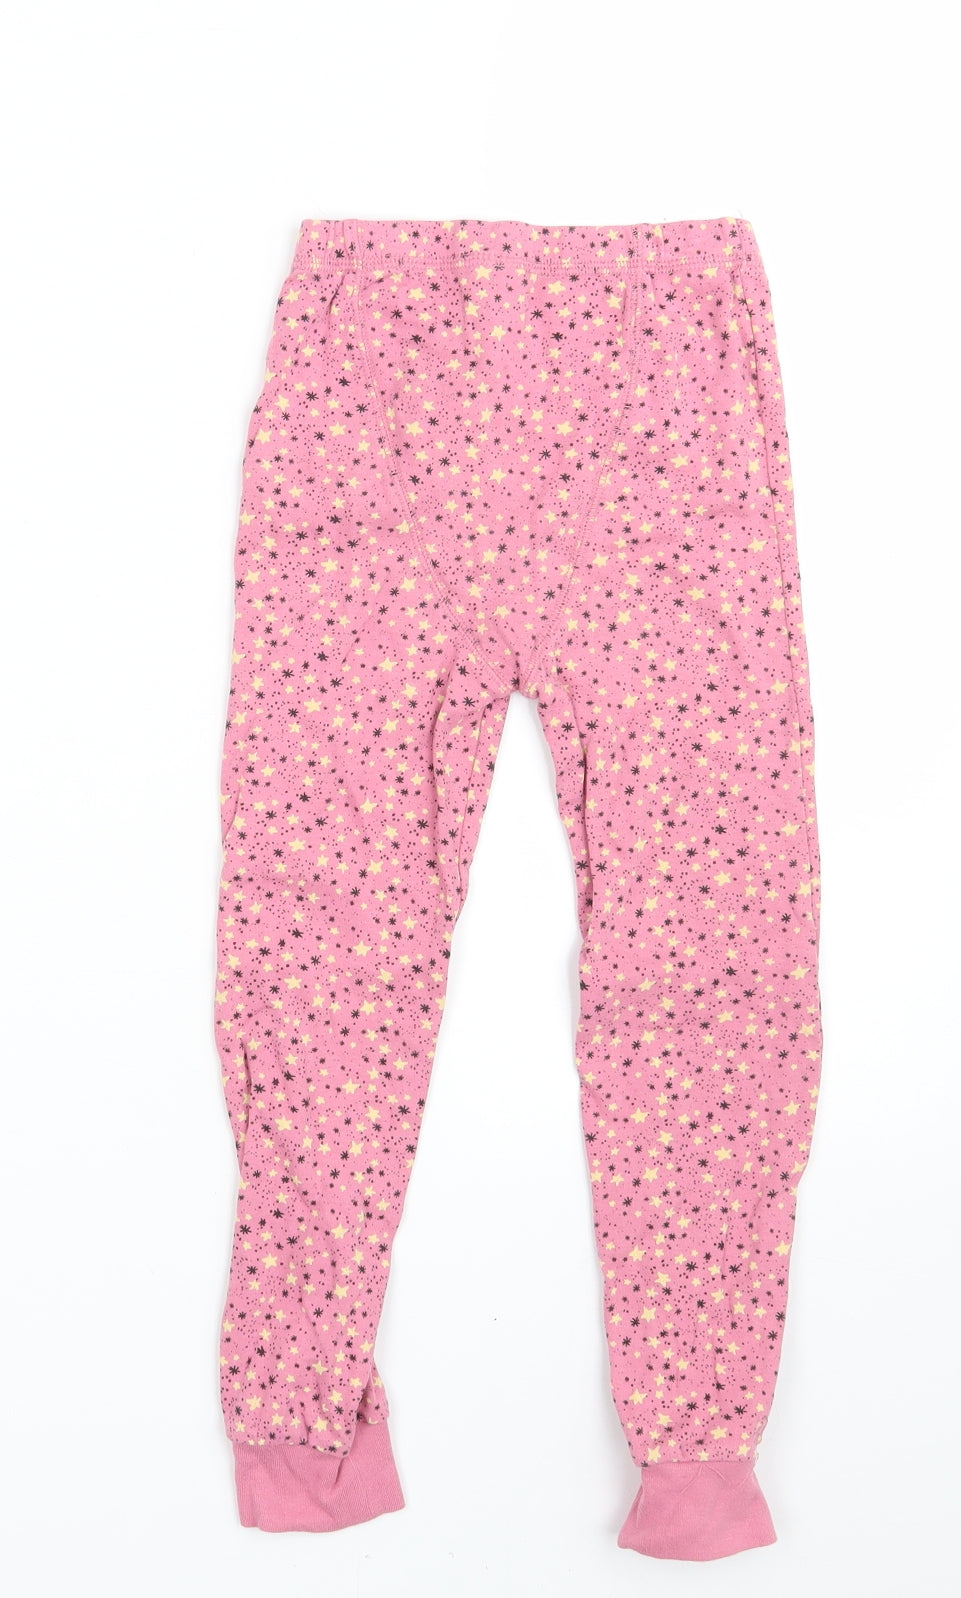 NEXT Girls Pink Polka Dot 100% Cotton Jegging Trousers Size 5-6 Years  Slim  - Inside Leg 18 Inches